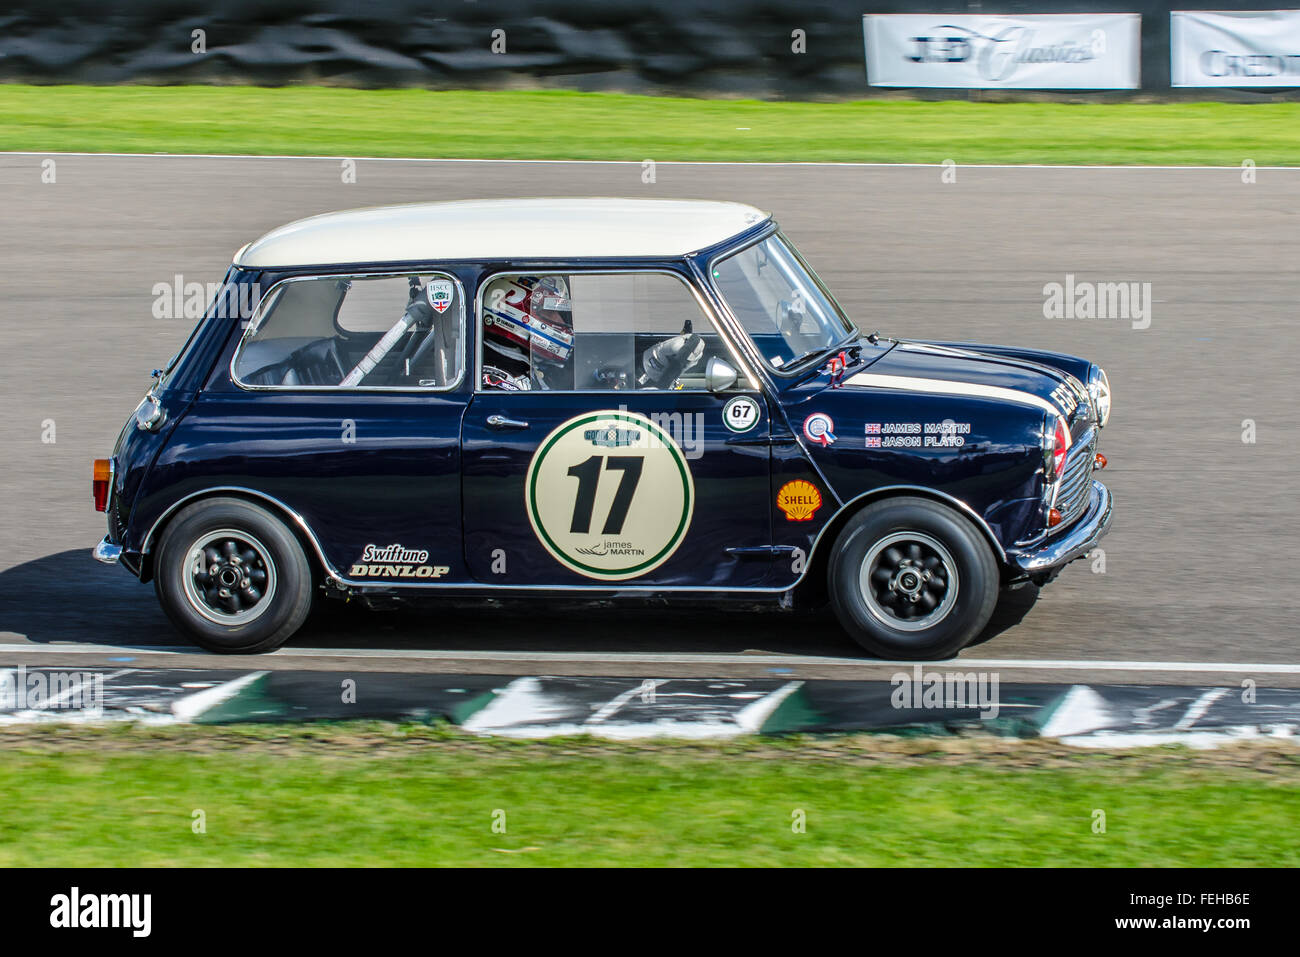 1964 Austin Mini Cooper S is owned by TV chef James Martin and raced by him and Jason Plato at the 2015 Goodwood Revival Stock Photo